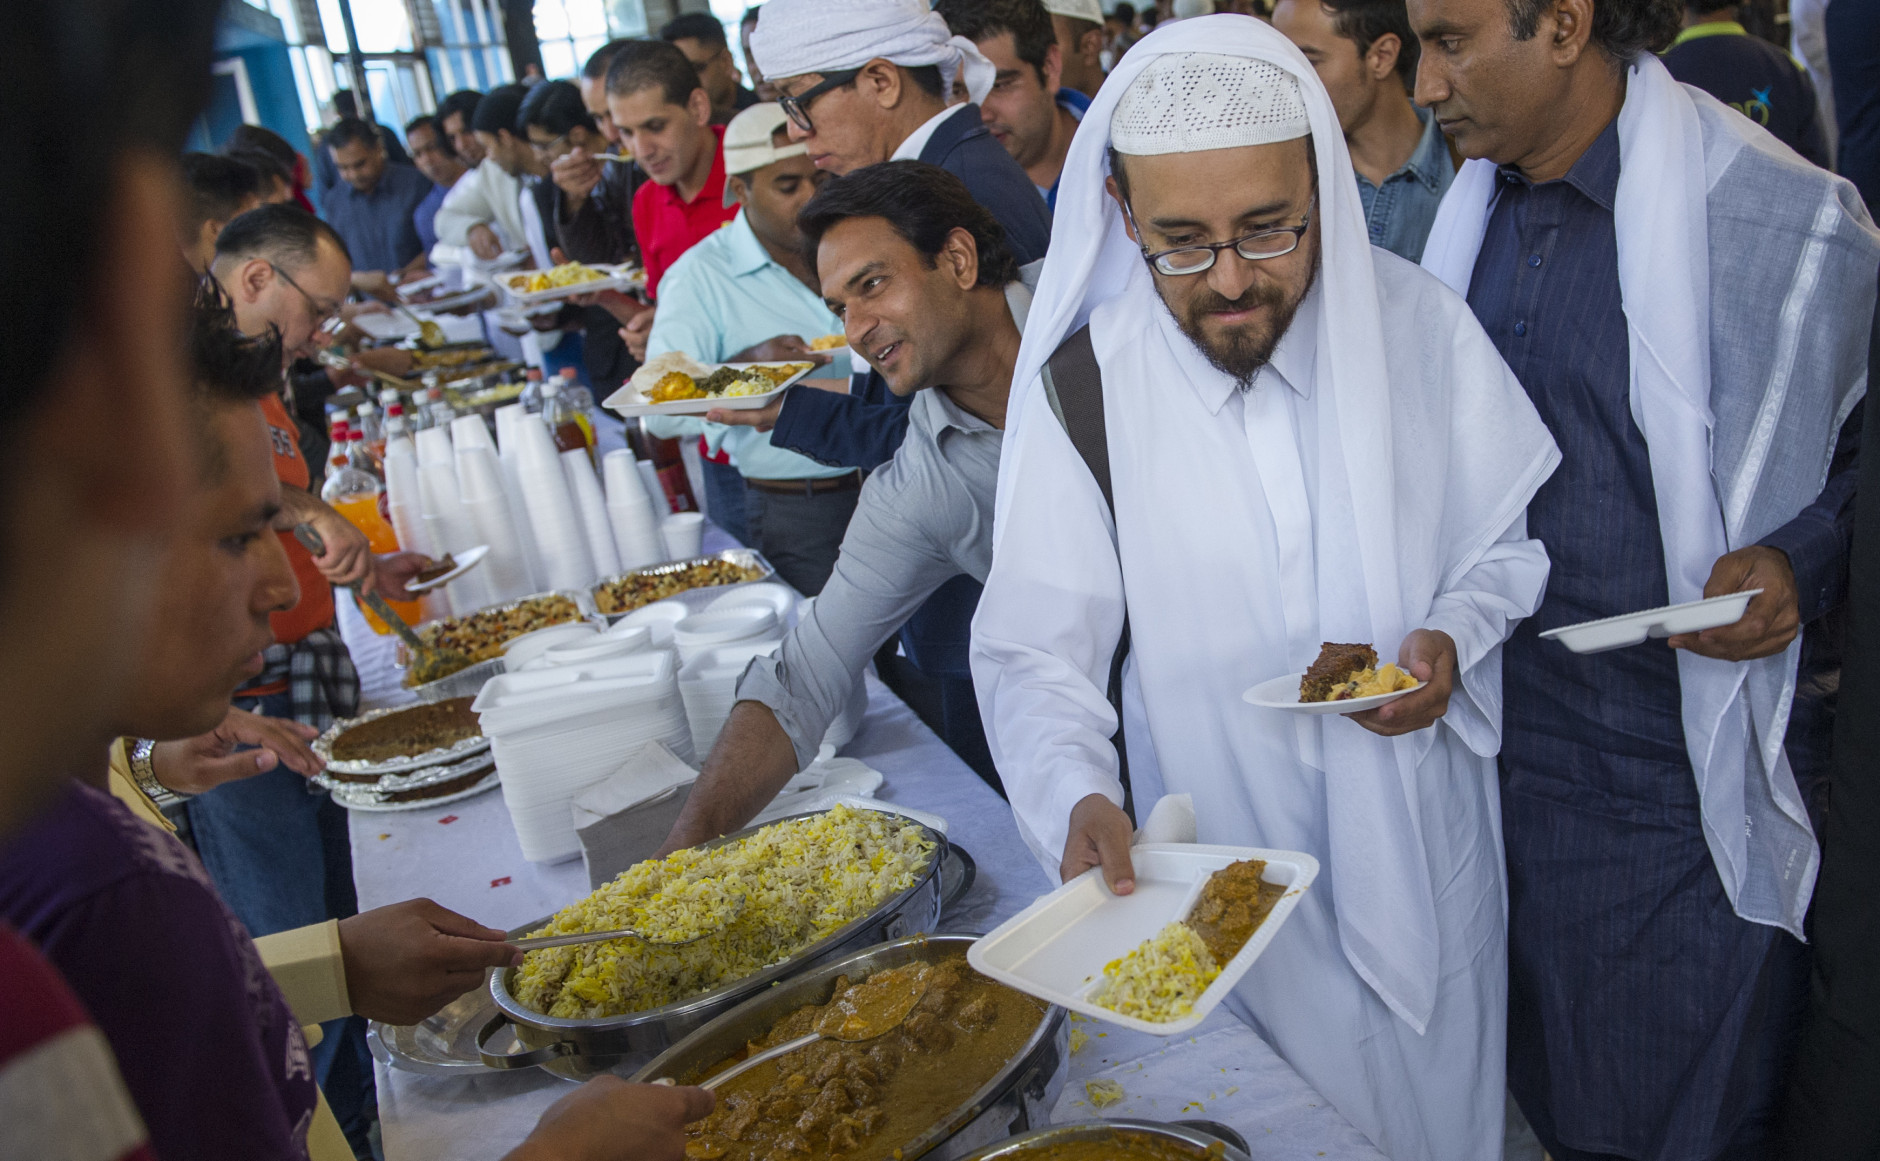 Muslims receive food after Eid al-Fitr prayers which mark the end of the holy fasting month of Ramadan, at a gym in Mexico City, Wednesday, July 6, 2016. According to the Washington-based Pew Forum on Religion and Public Life, today there are approximately 110,000 Muslims living in Mexico. (AP Photo/Nick Wagner)